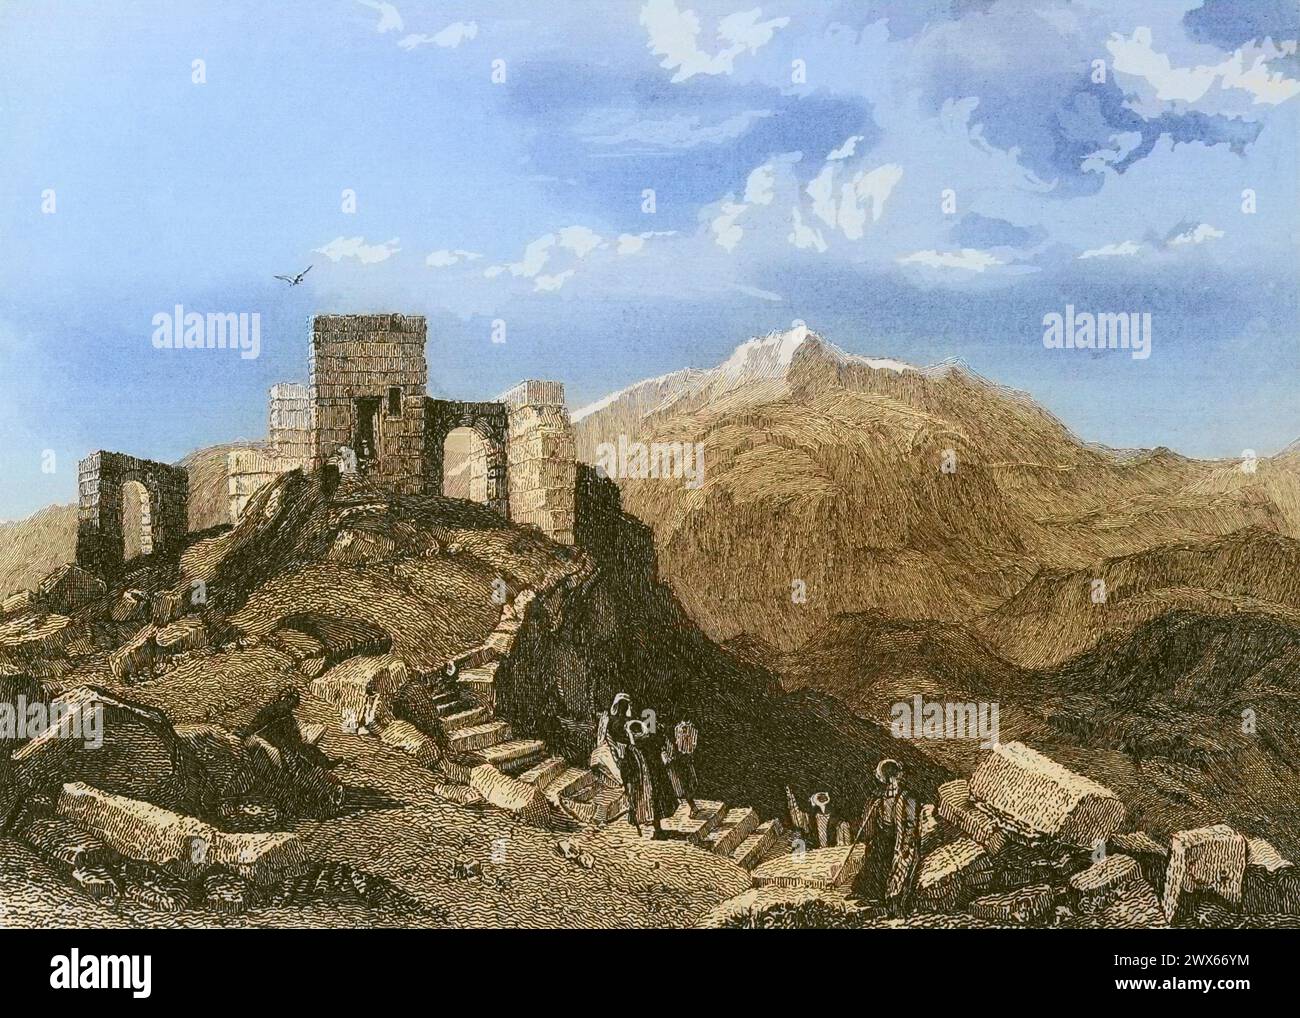 Summit of Mount Sinai. Ruins of a temple. Engraving by Emile Rouargue. Later colouration. 'La Tierra Santa y los lugares recorridos por los profetas, por los apóstoles y por los cruzados' (The Holy Land and the sites traversed by the prophets, by the apostles and by the crusaders). Published in Barcelona by the printing house of Joaquin Verdaguer, 1840. Stock Photo